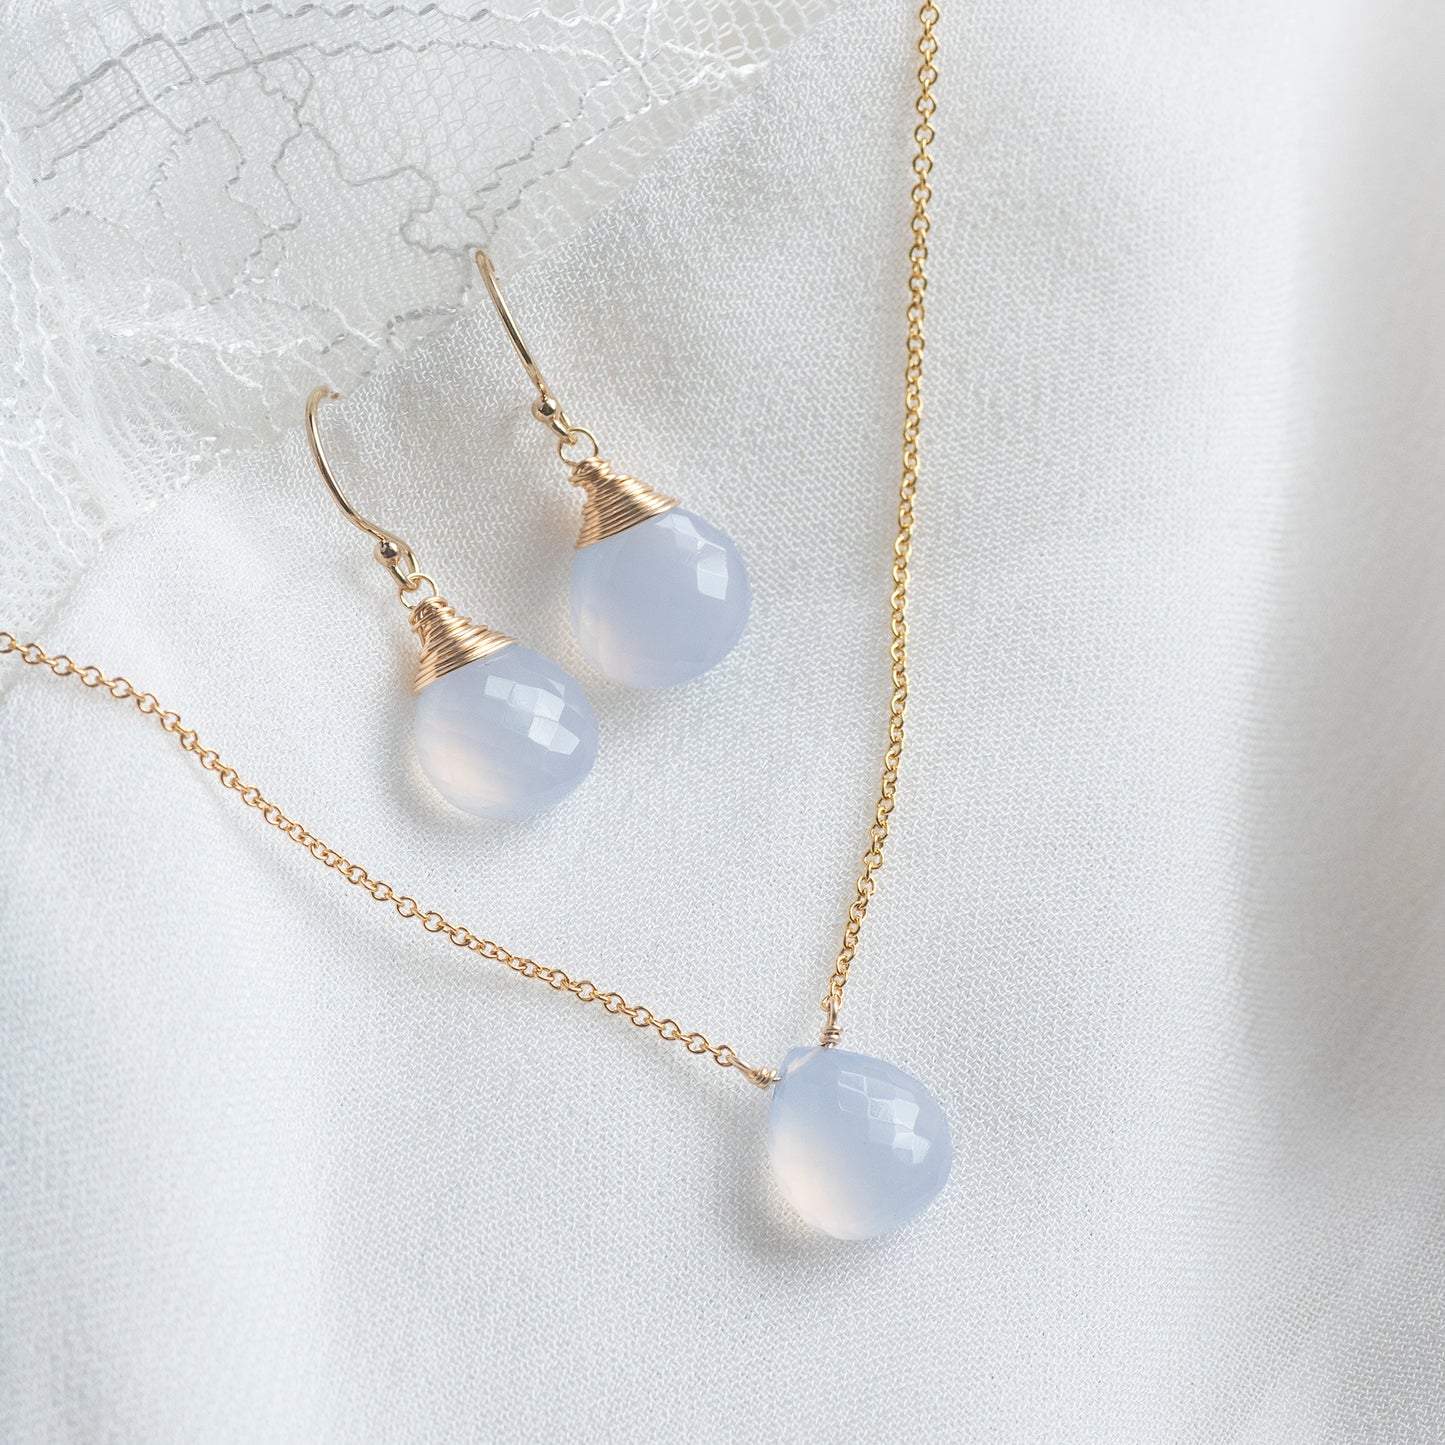 Blue Chalcedony Earrings - Silver, Gold & Rose Gold